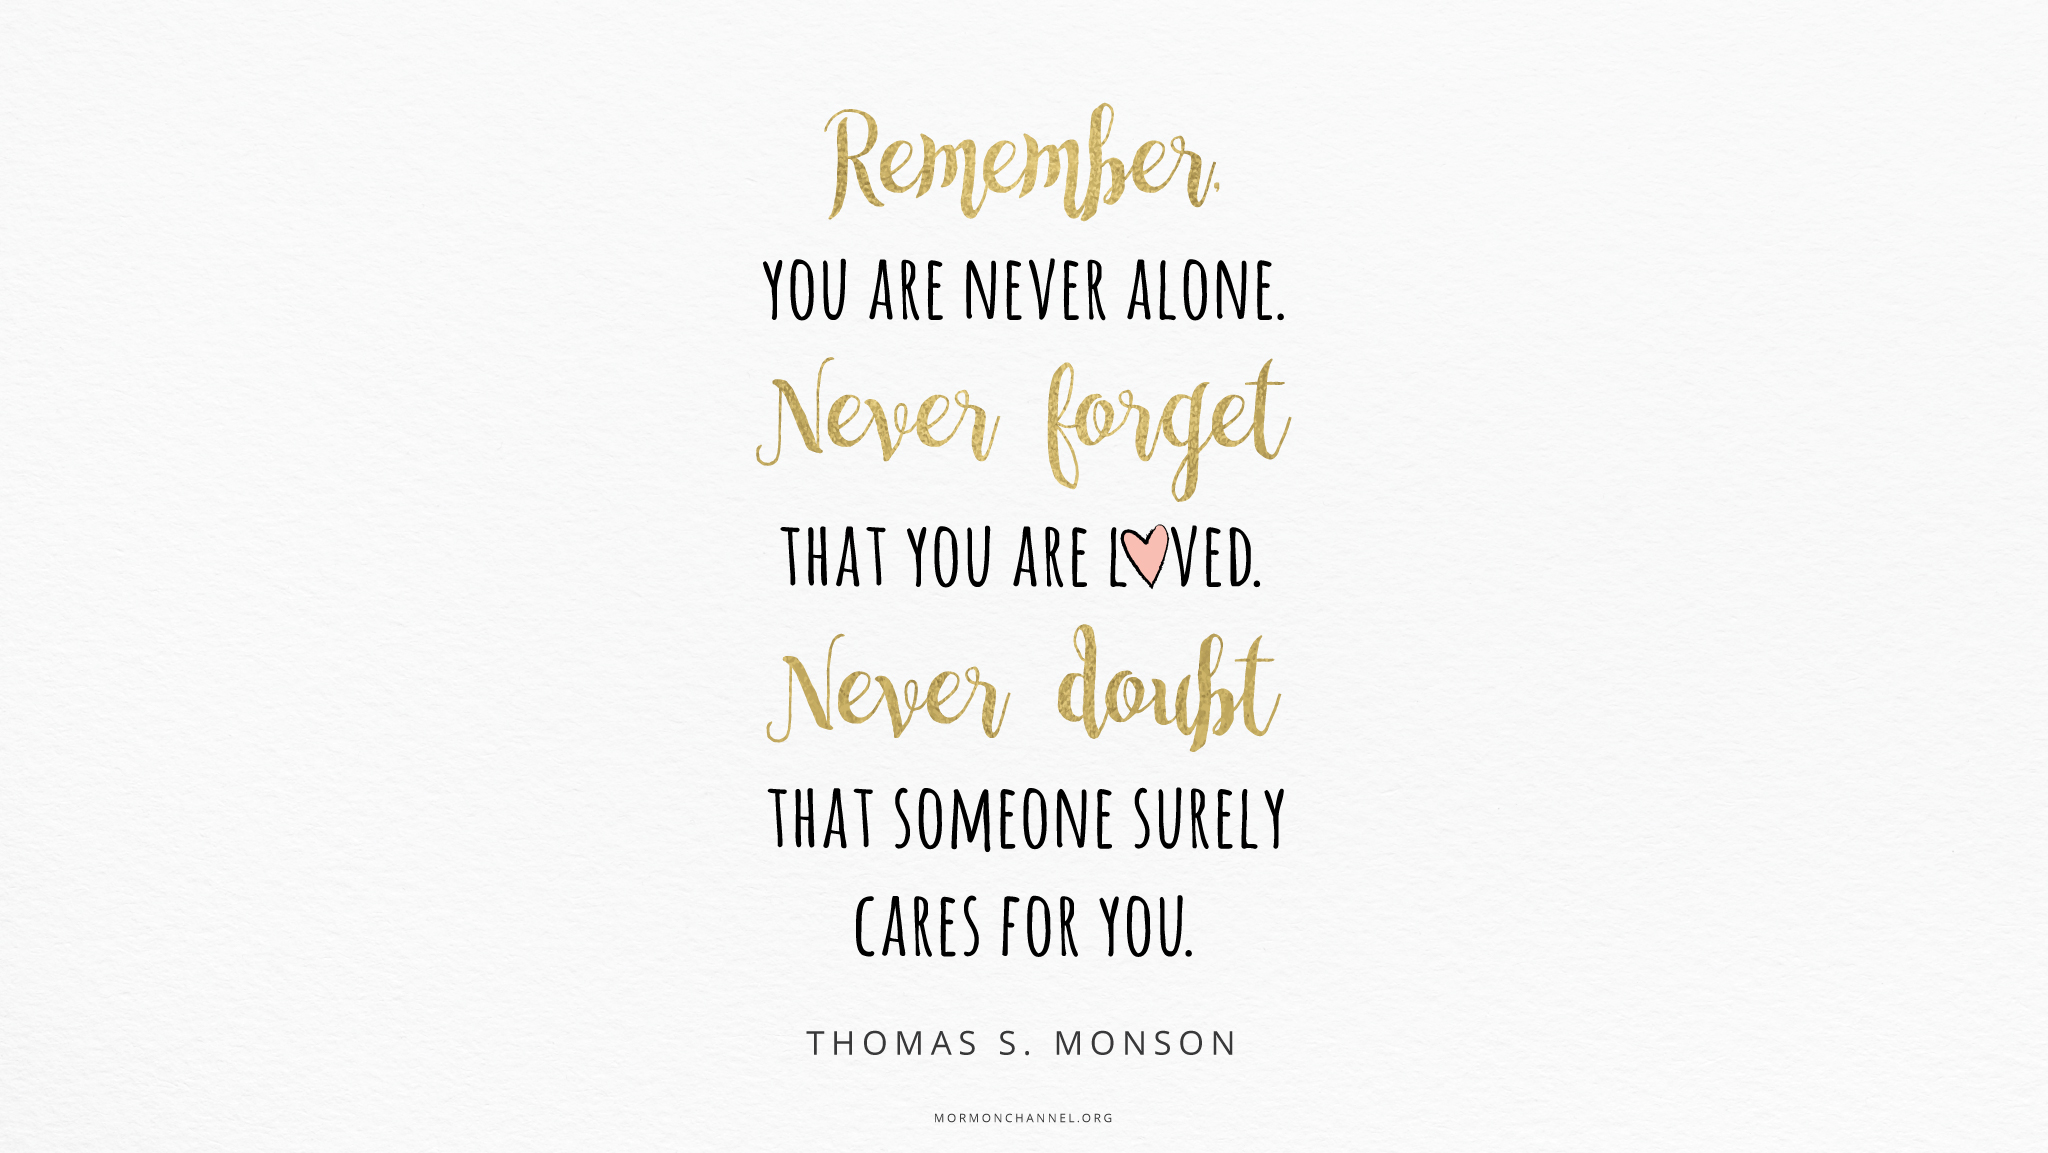 Daily Quote: Reaching out Matters  Mormon Channel